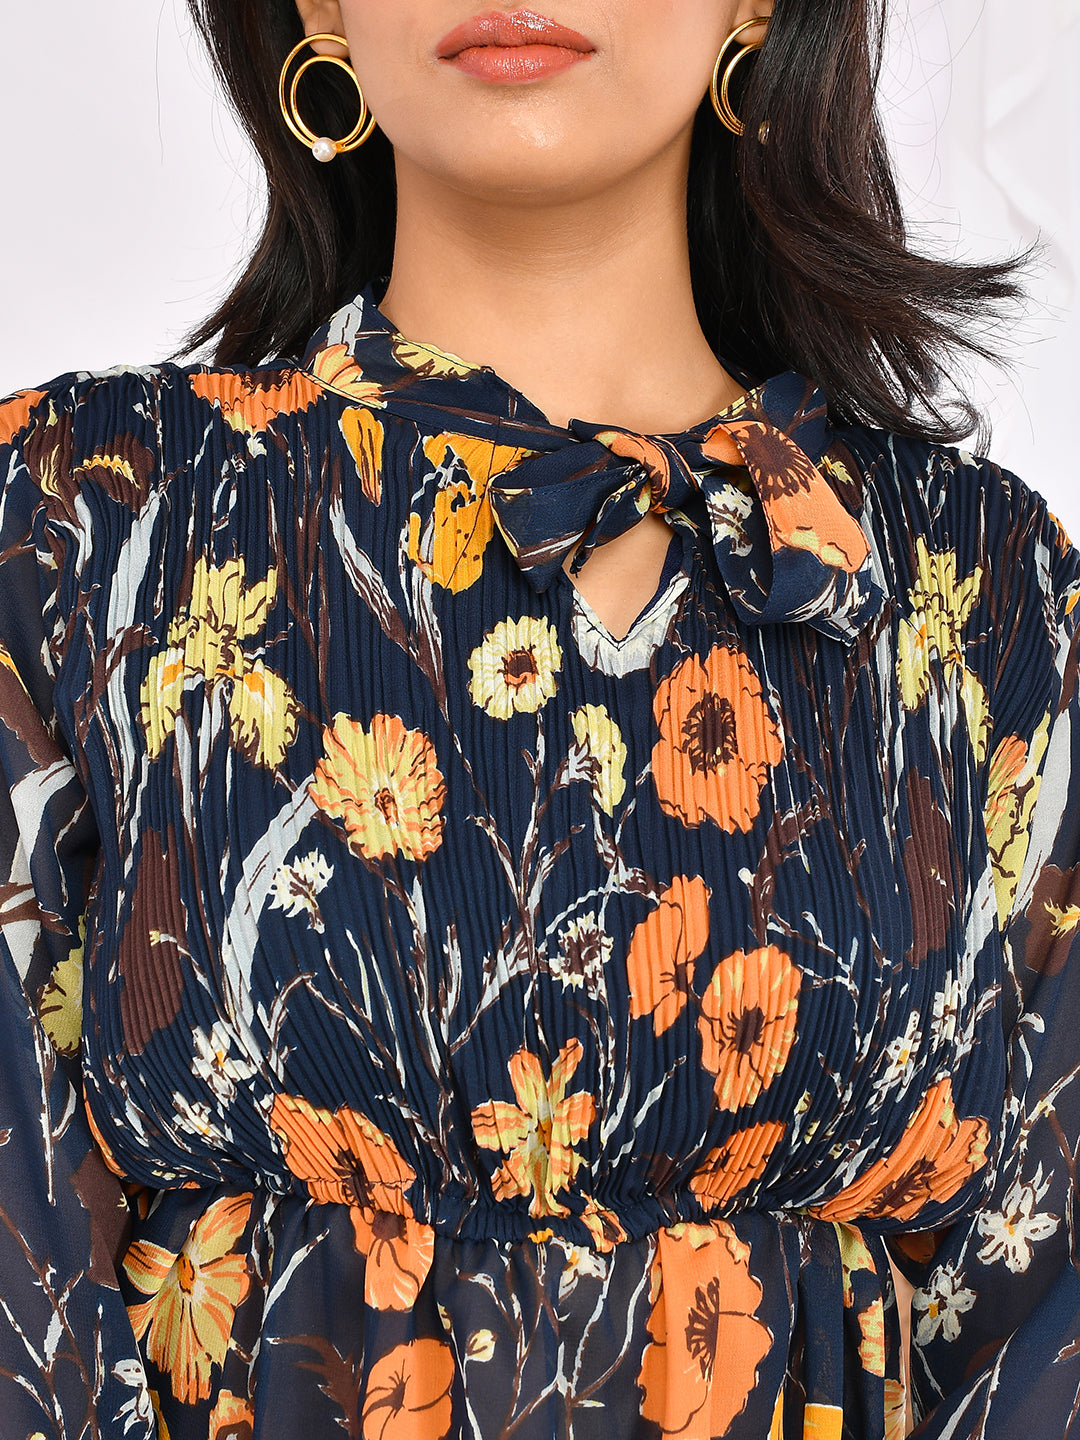 Expertly crafted with a delicate chiffon fabric, these high neck tops are adorned with a beautiful floral print. Perfect for girls and women, they offer a sophisticated and fashion-forward look. Elevate your wardrobe with airy and feminine tops that exude elegance and style.